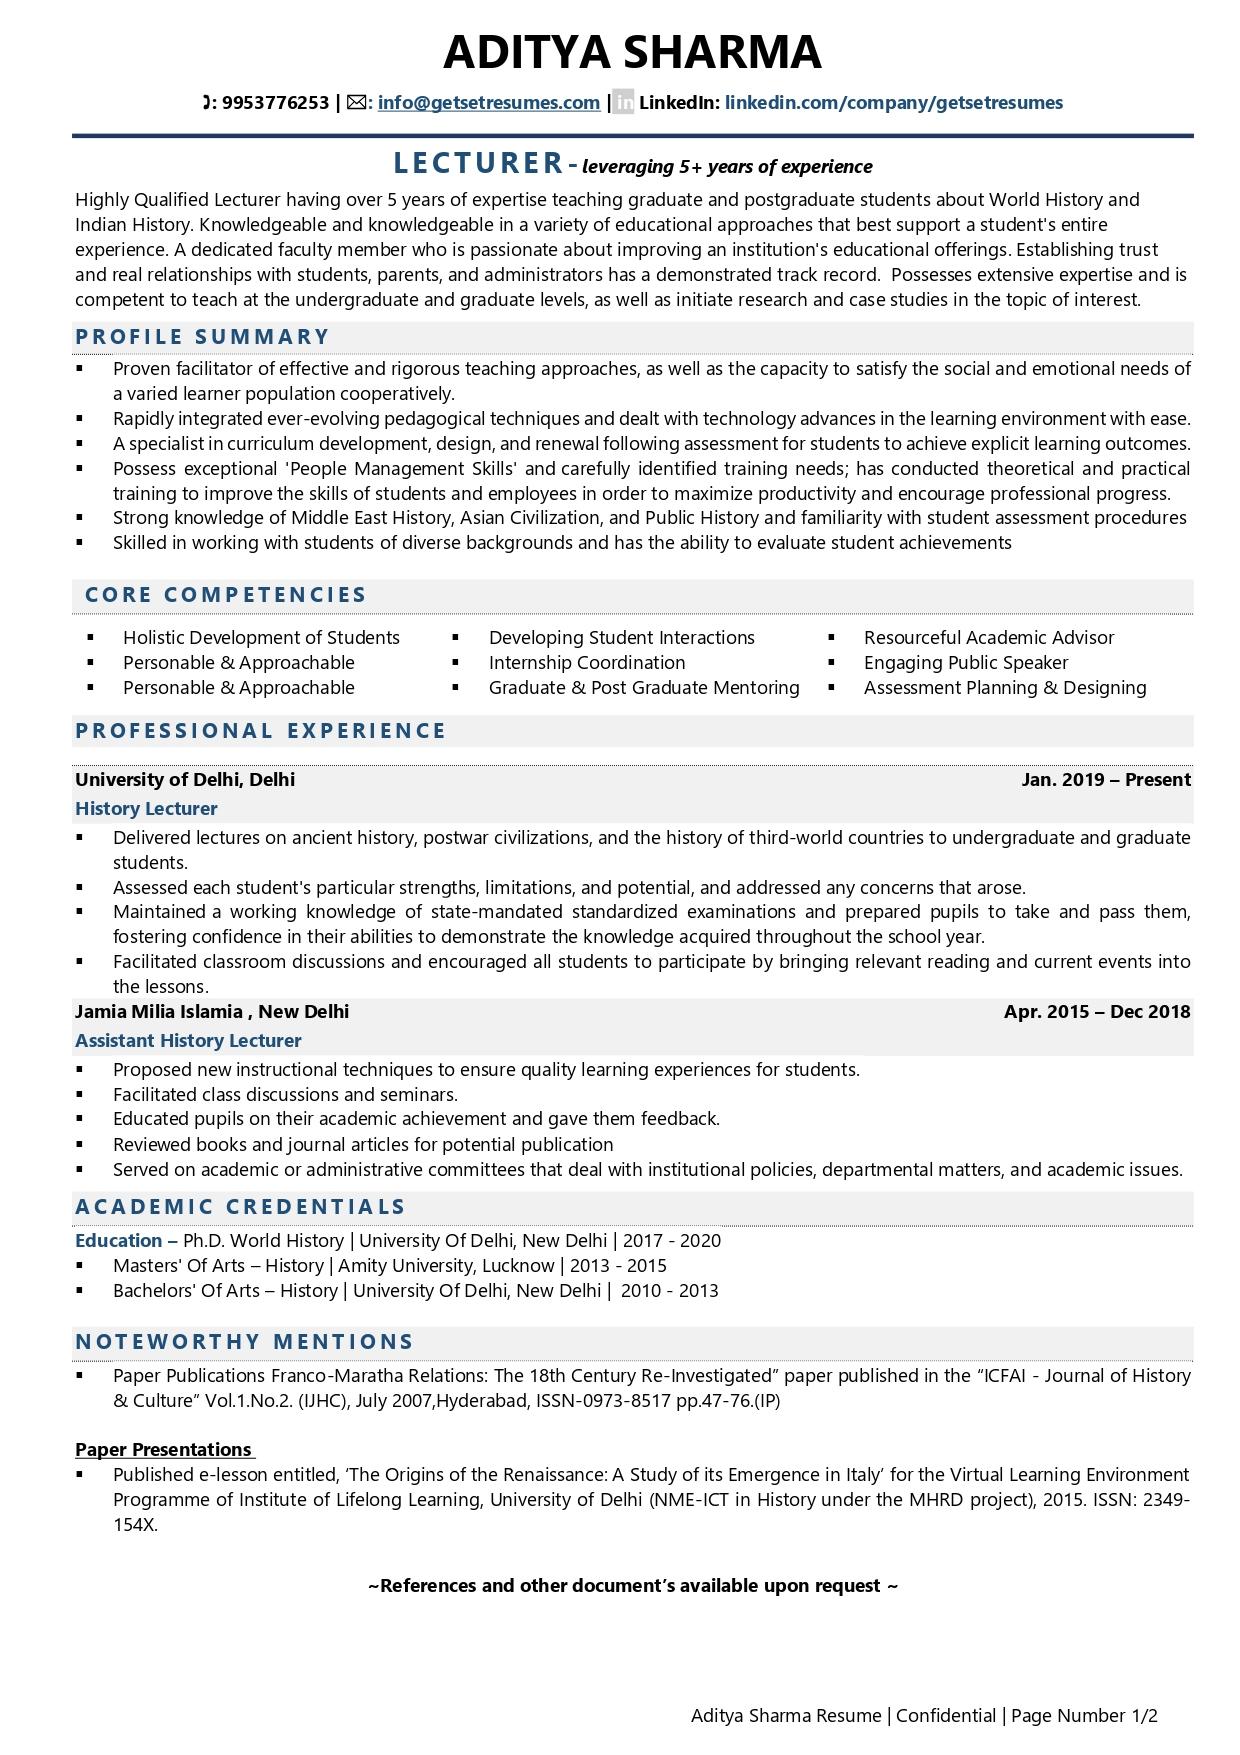 Lecturer - Resume Example & Template